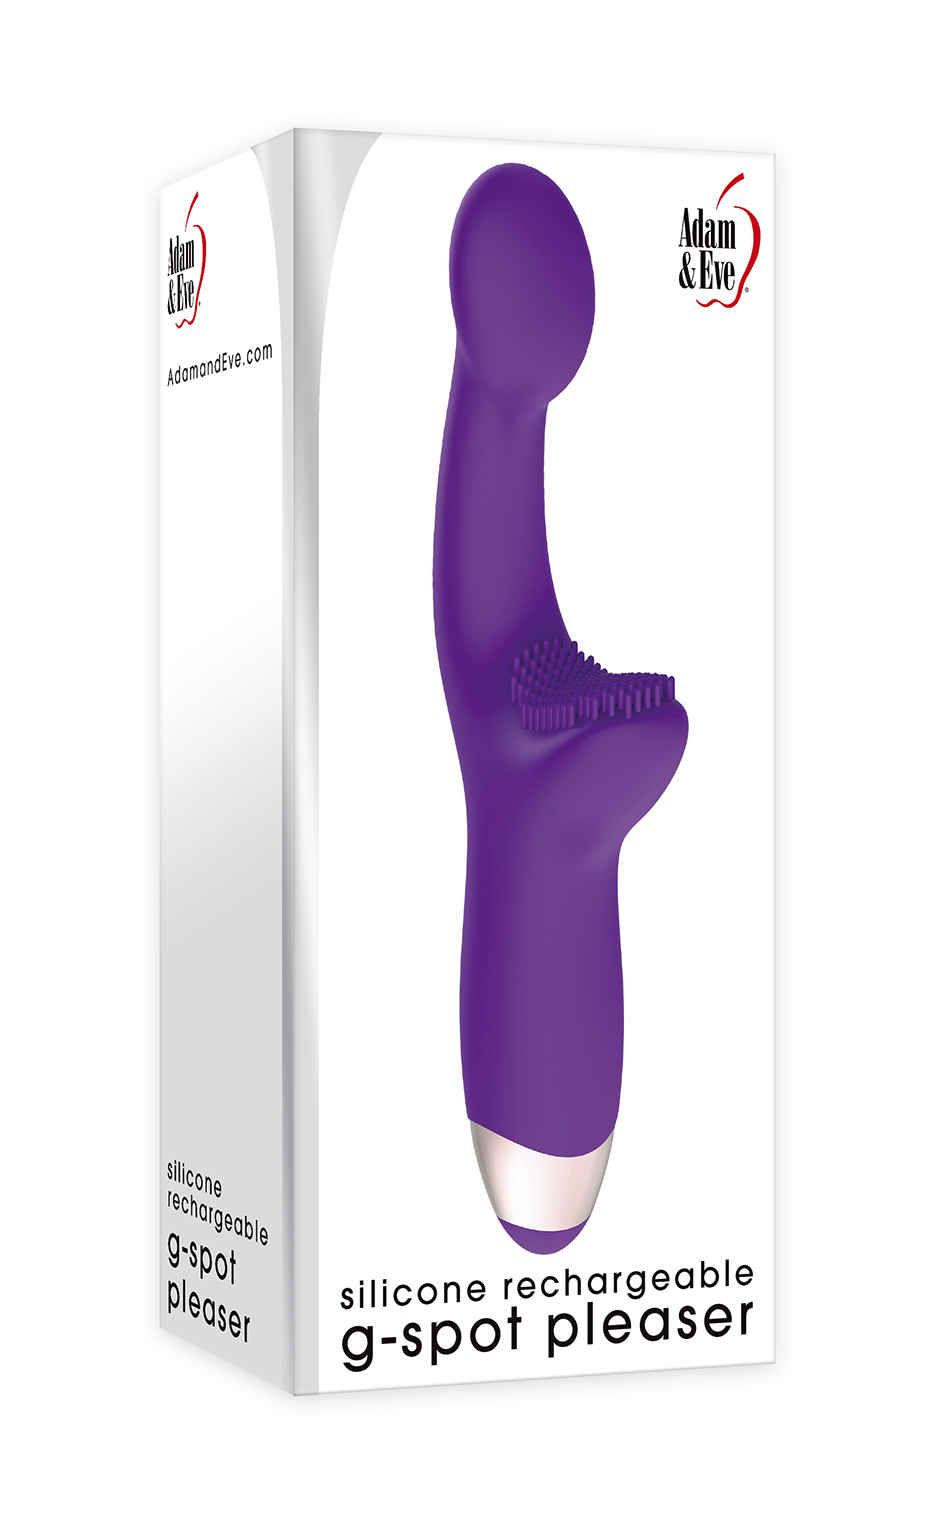 ADAM & EVE SILICONE G-SPOT PLEASER RECHARGEABLE - ENAEWF70512